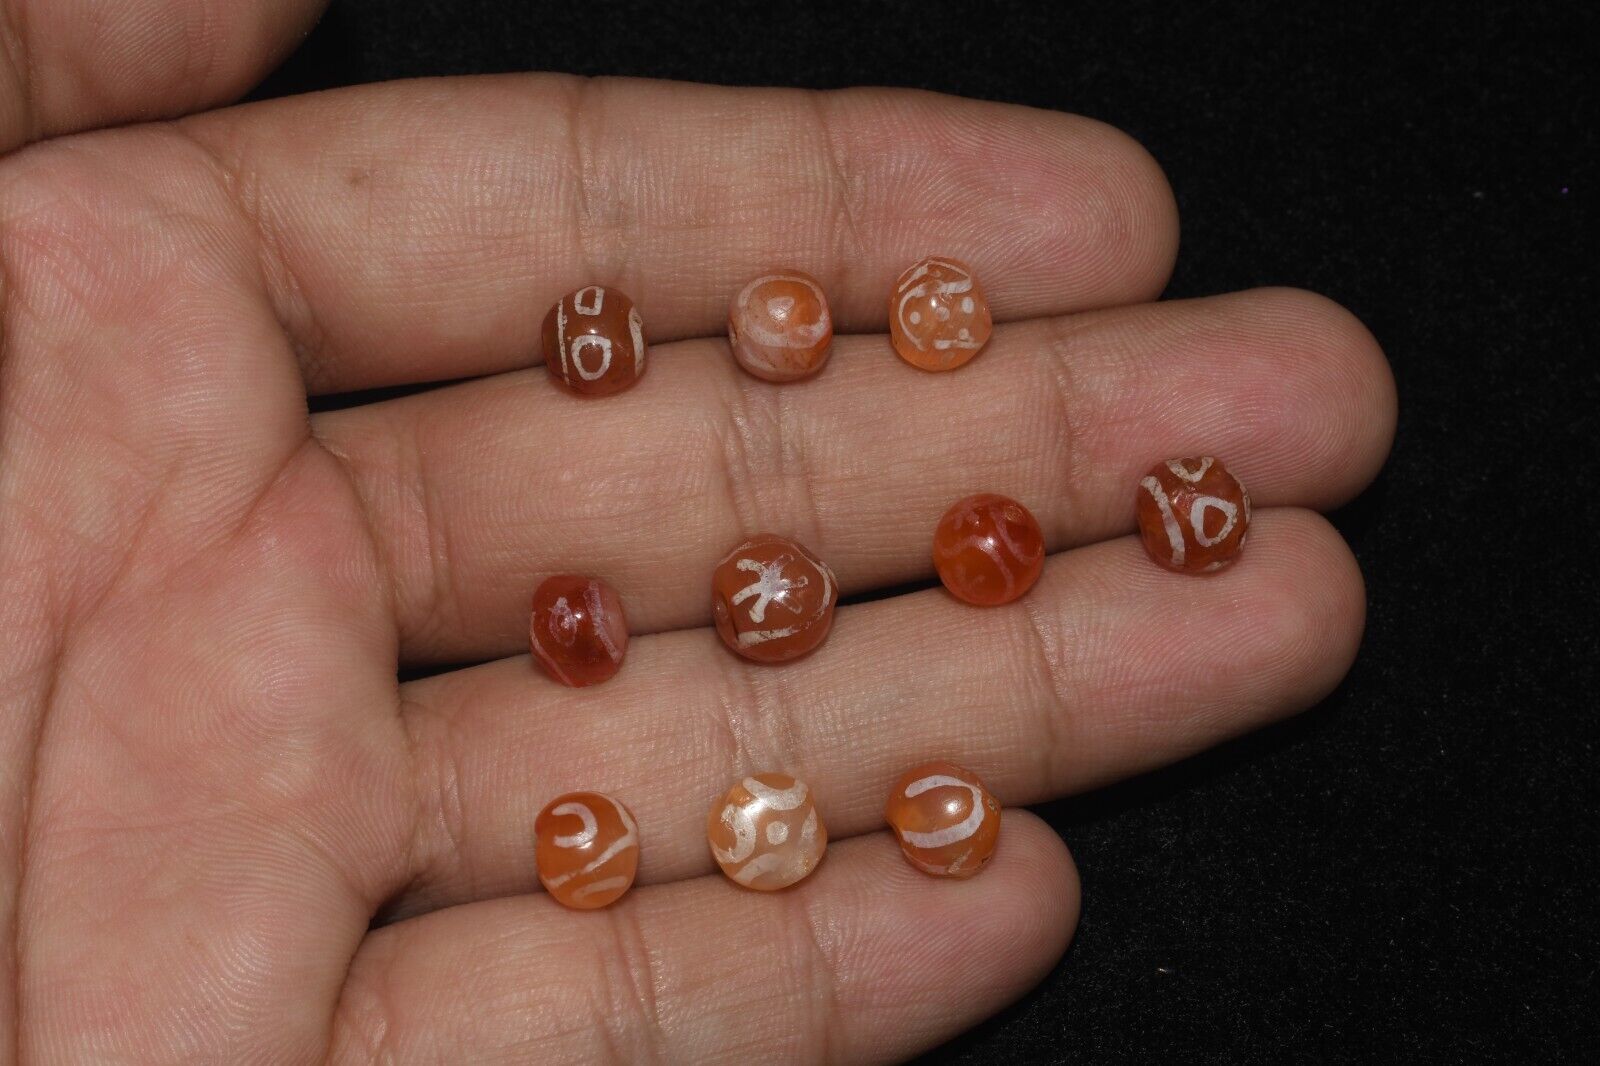 Authentic 10 Ancient Indus Valley Etched Round Carnelian Beads Ca. 2600-1700 BCE Без бренда - фотография #3